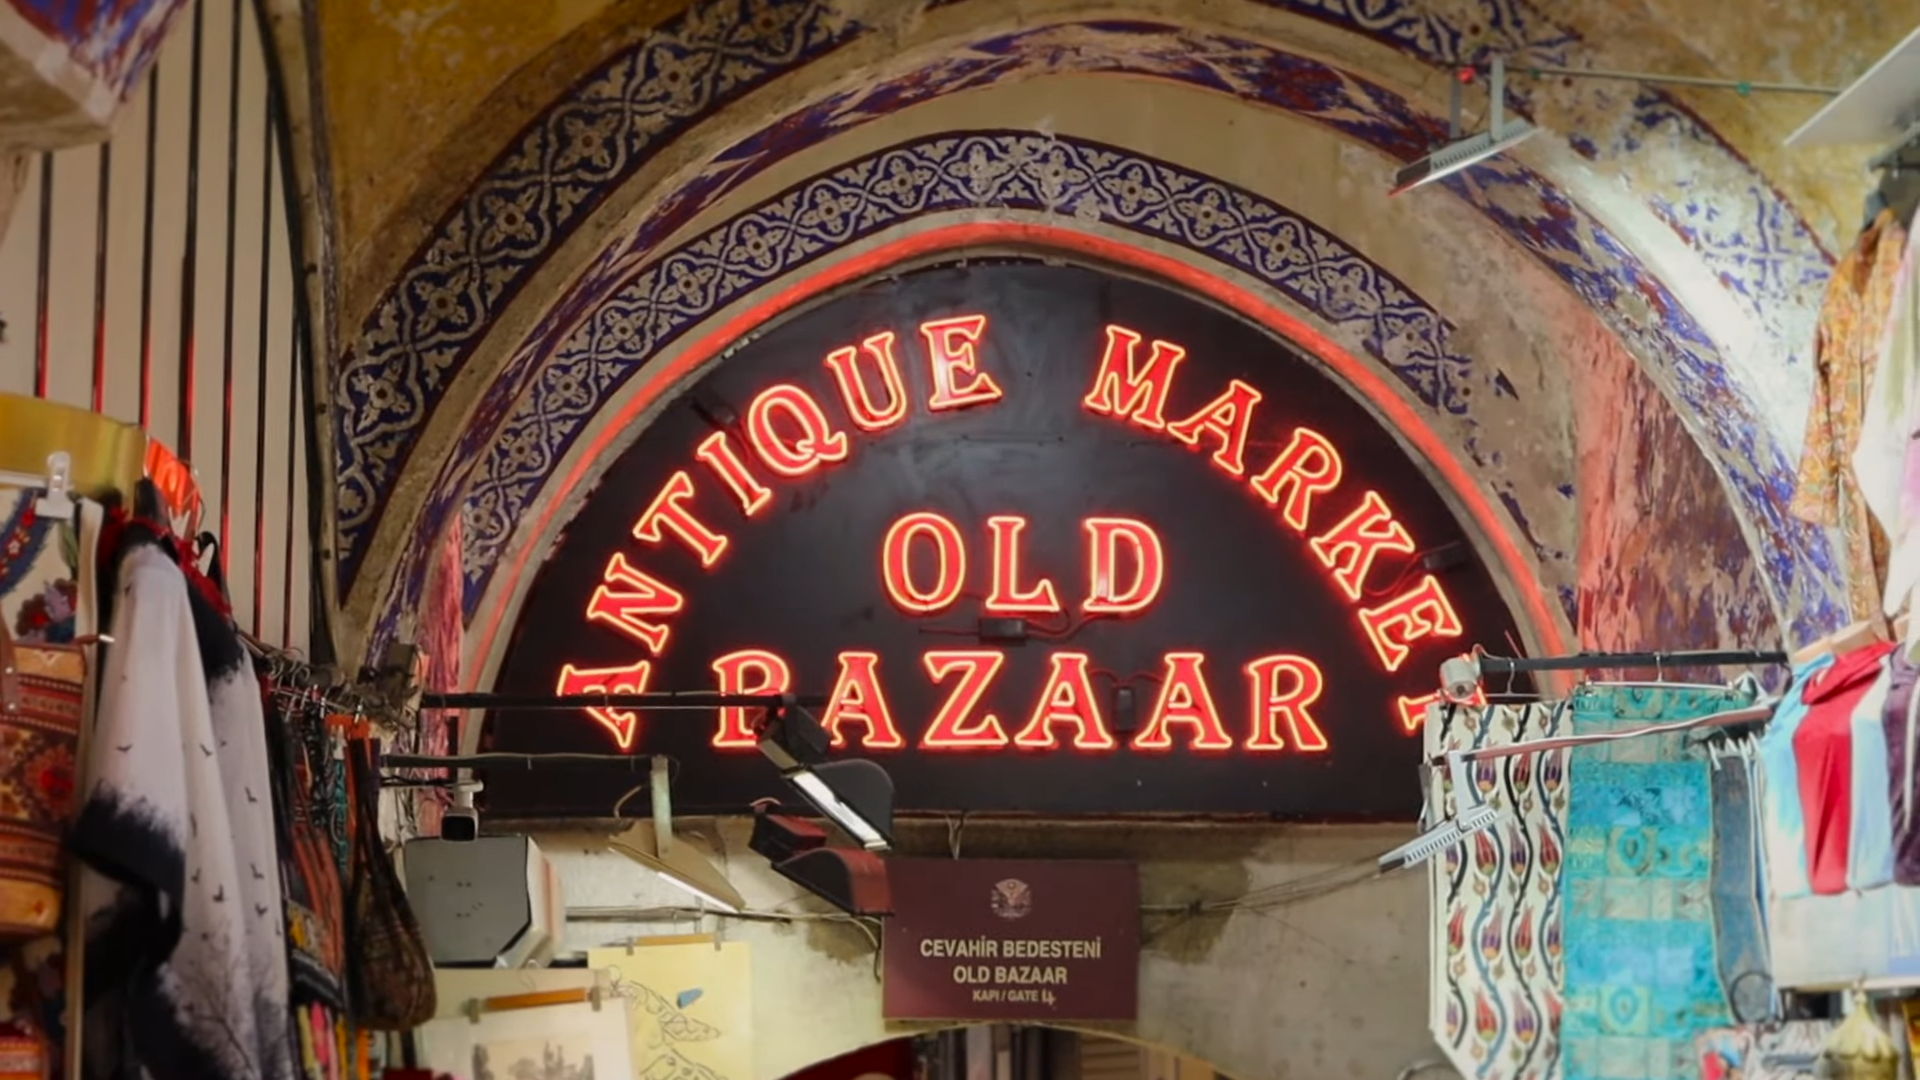 Grand Bazaar Istanbul, Information You Should Know